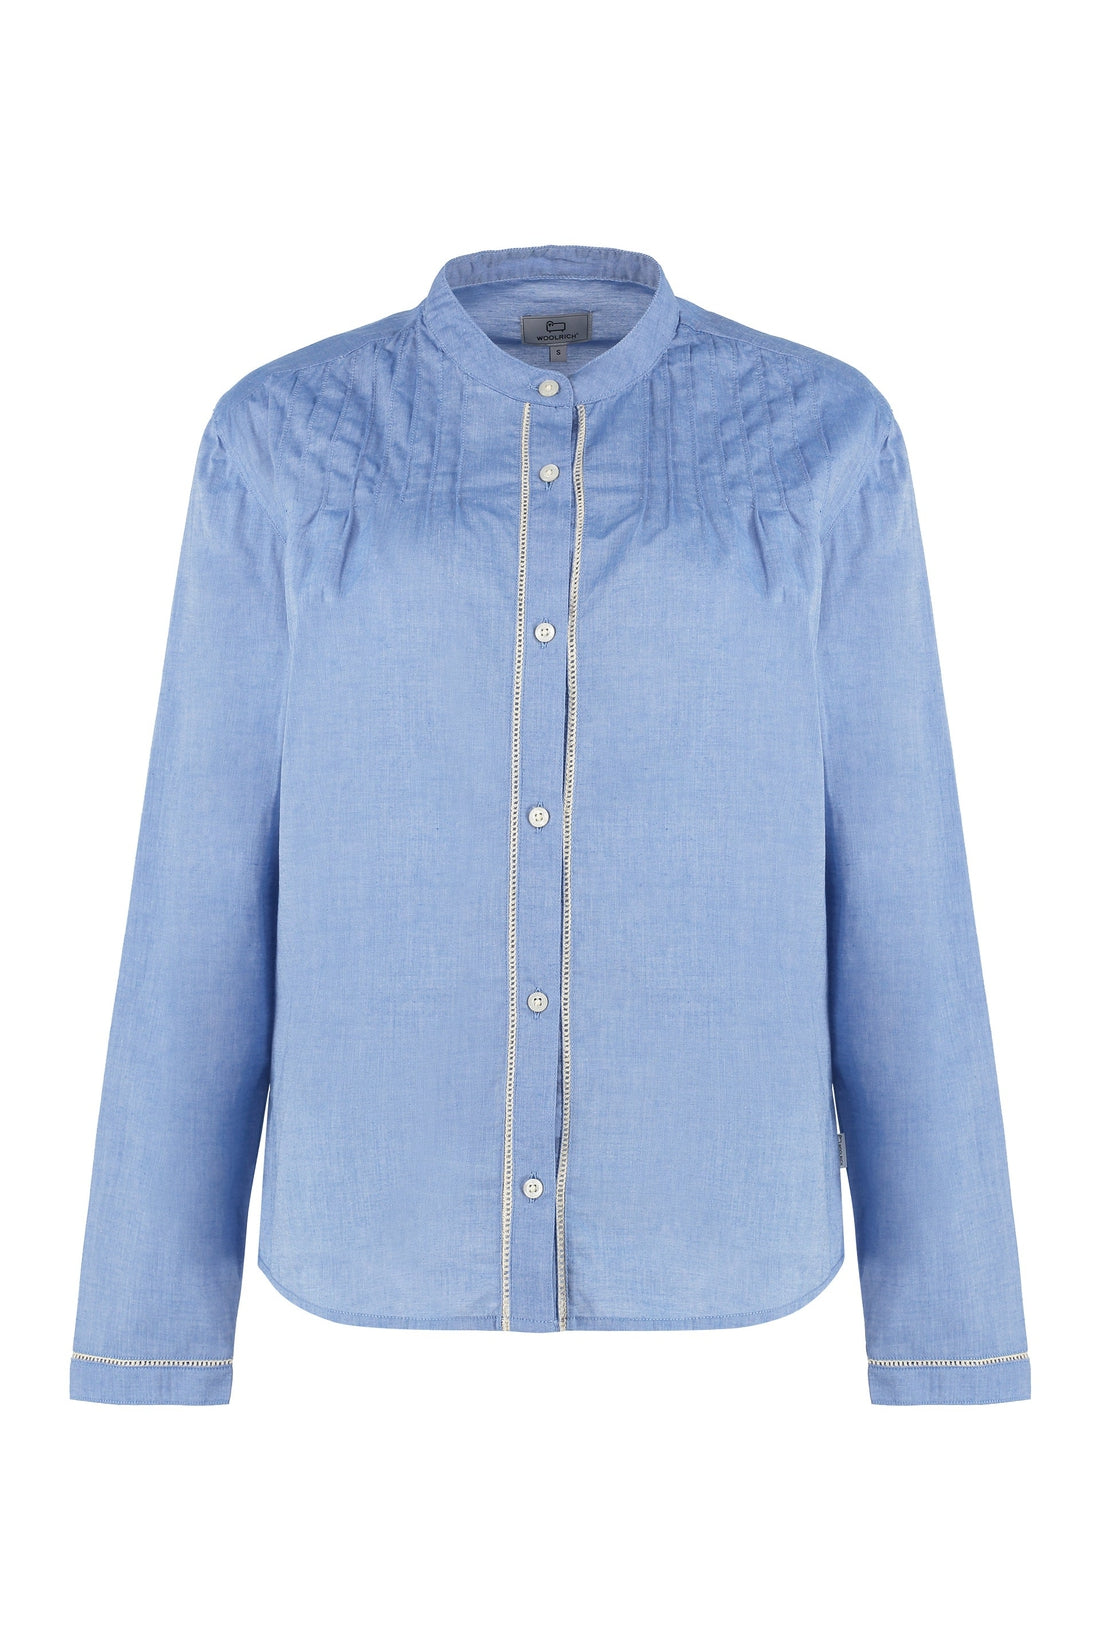 Woolrich-OUTLET-SALE-Embroidered cotton shirt-ARCHIVIST